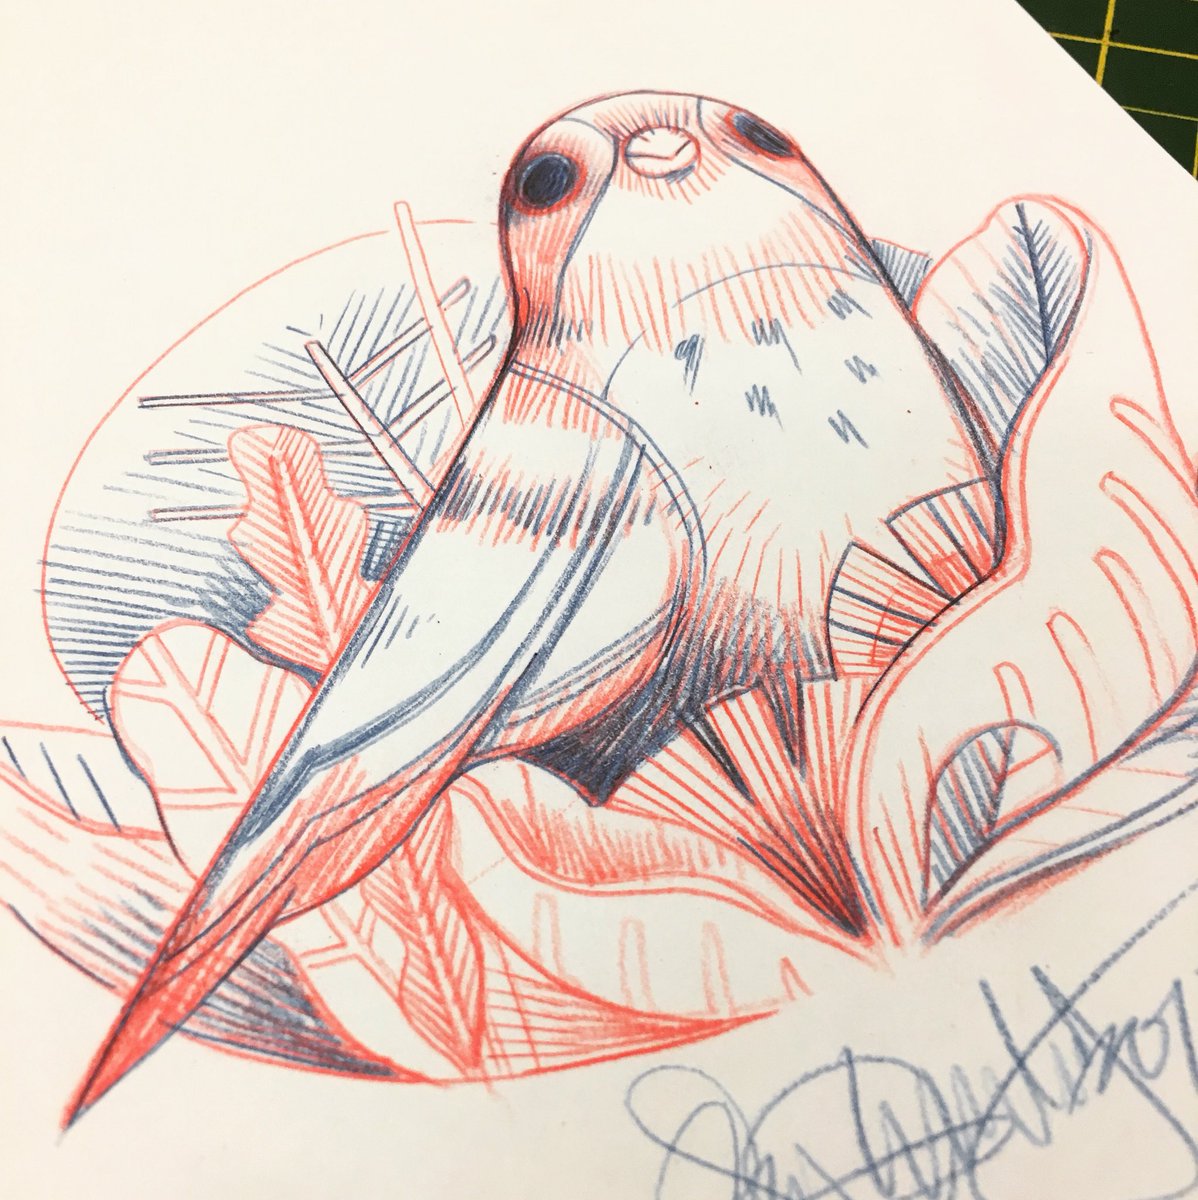 Mckinley on Twitter: "Original blue/red pencil sketch going in an order, one the A2 + prints. Take heed, order before 19th Dec for UK delivery before Christmas https://t.co/tIqLadu7eo" / Twitter